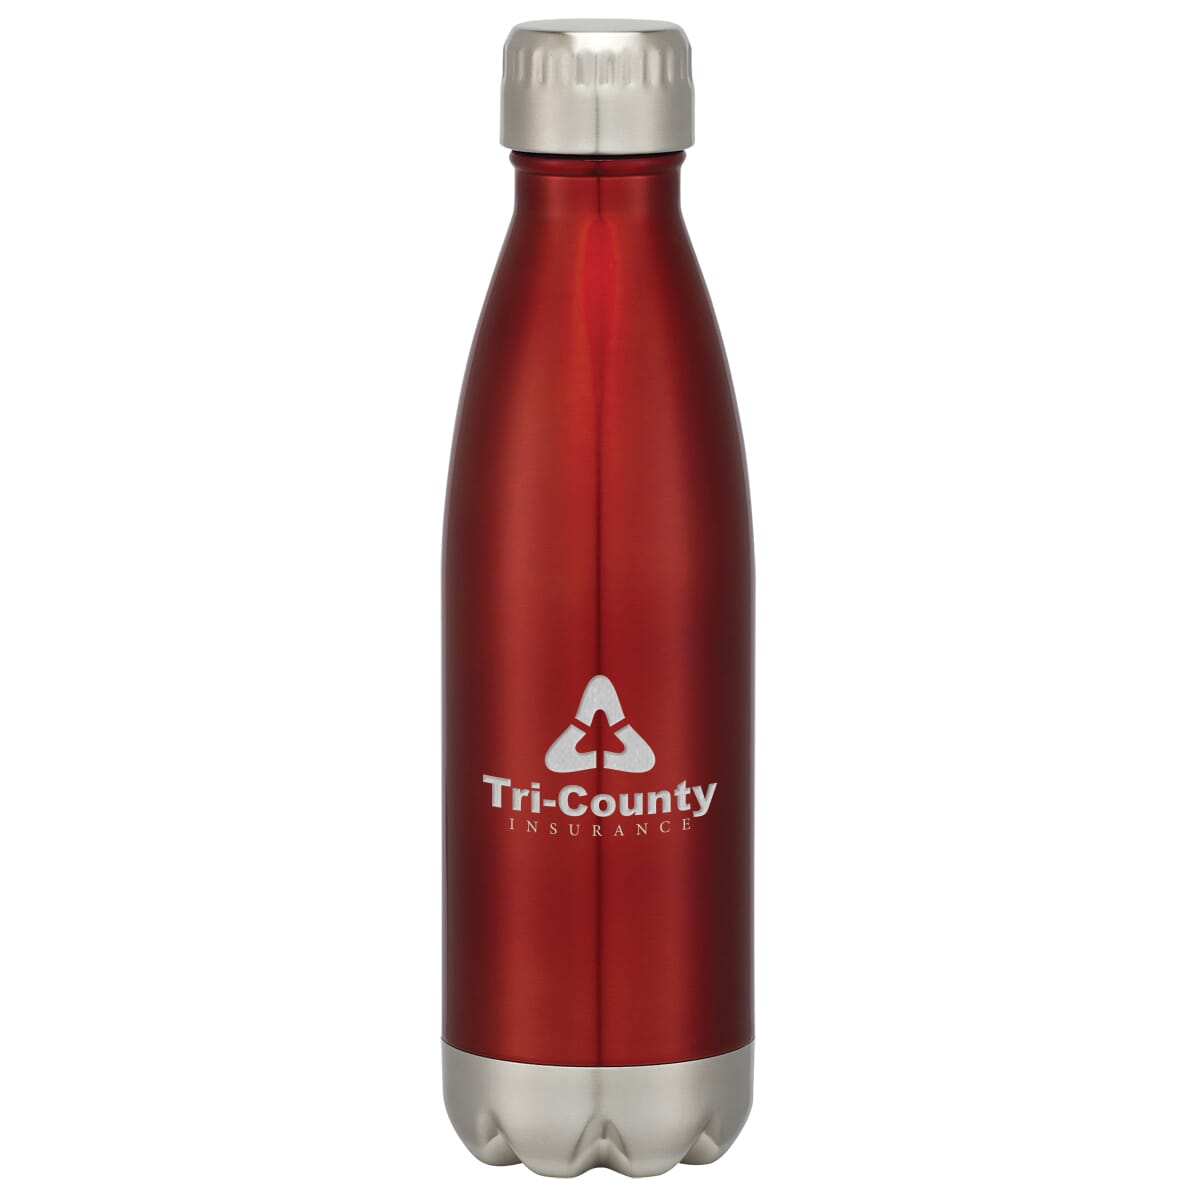 Manna 50-fl oz Stainless Steel Insulated Water Bottle | 21591-E